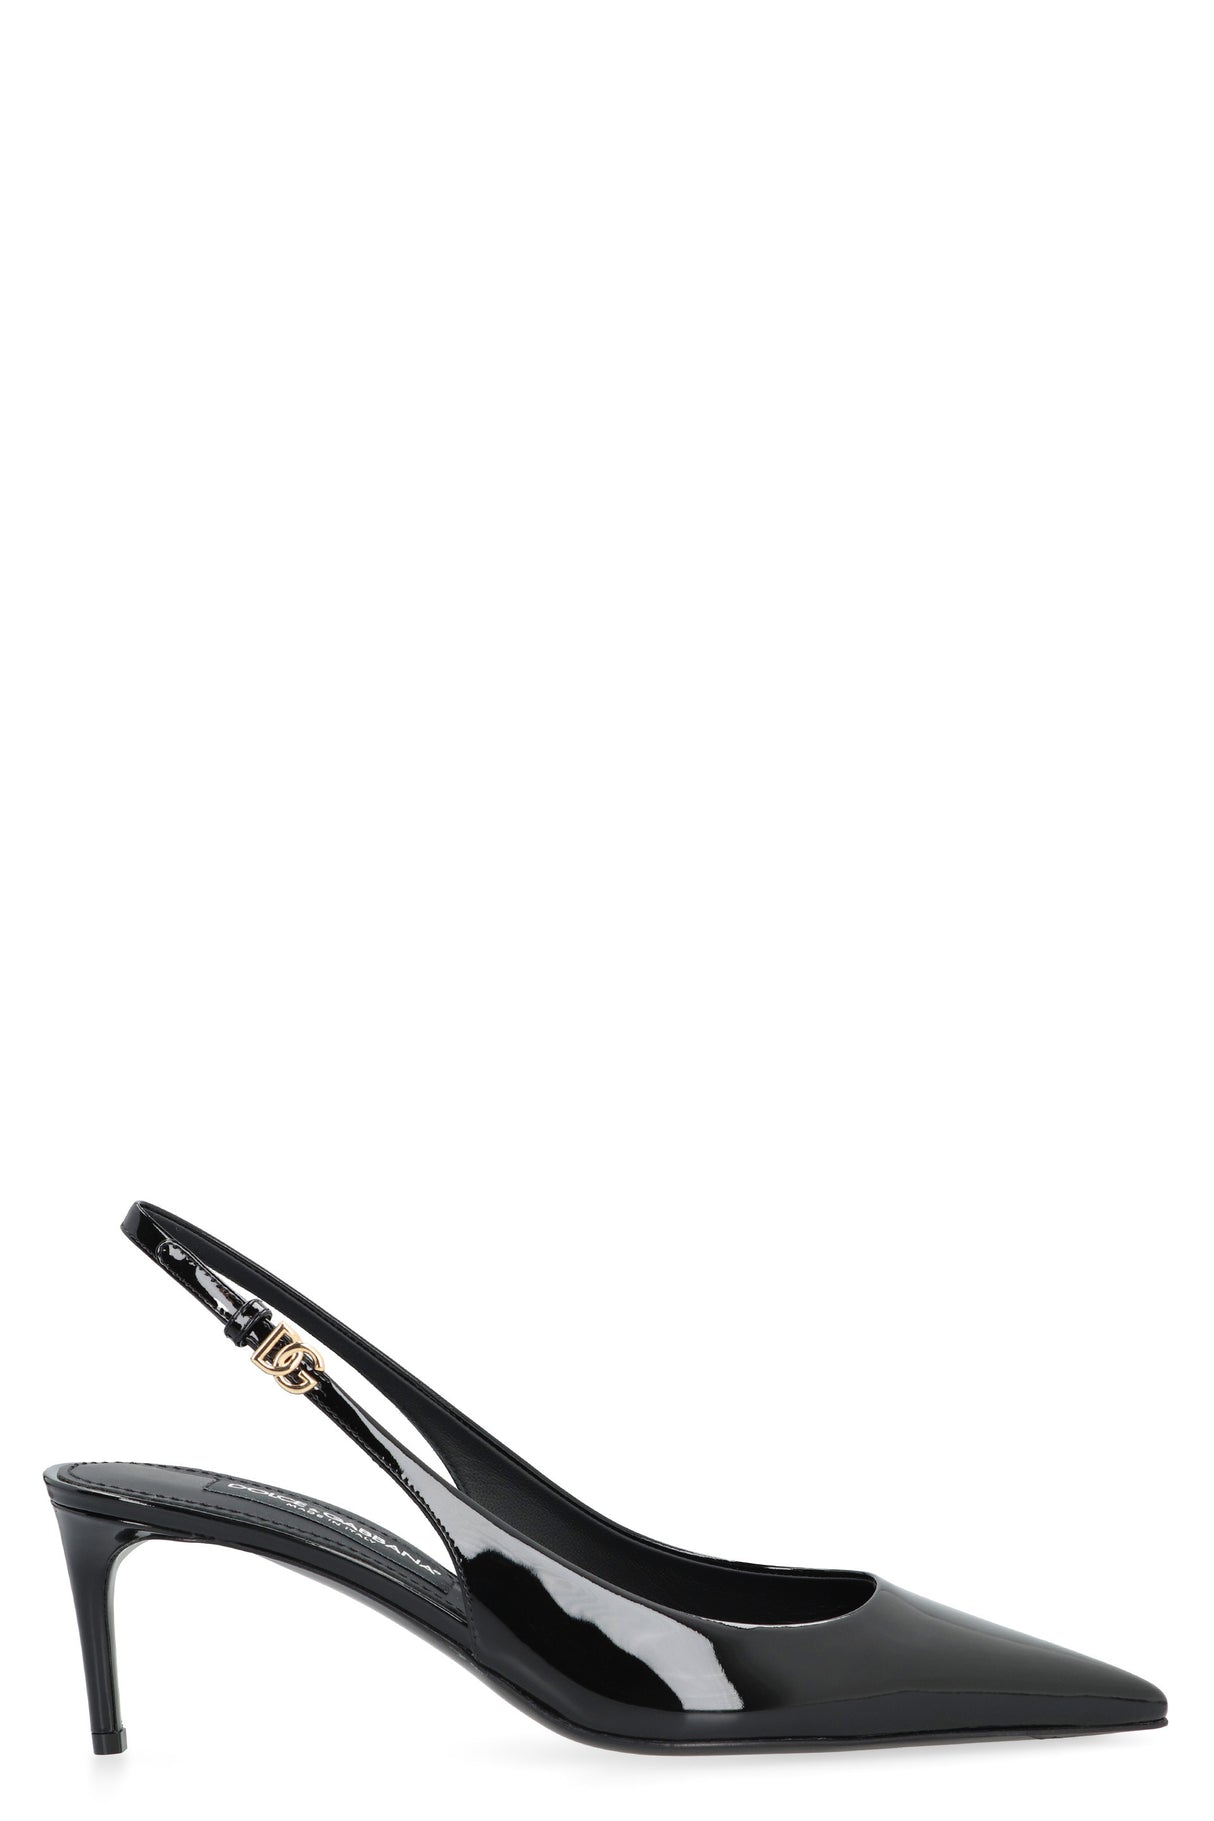 DOLCE & GABBANA Classic Leather Slingback Pumps for Women in Black